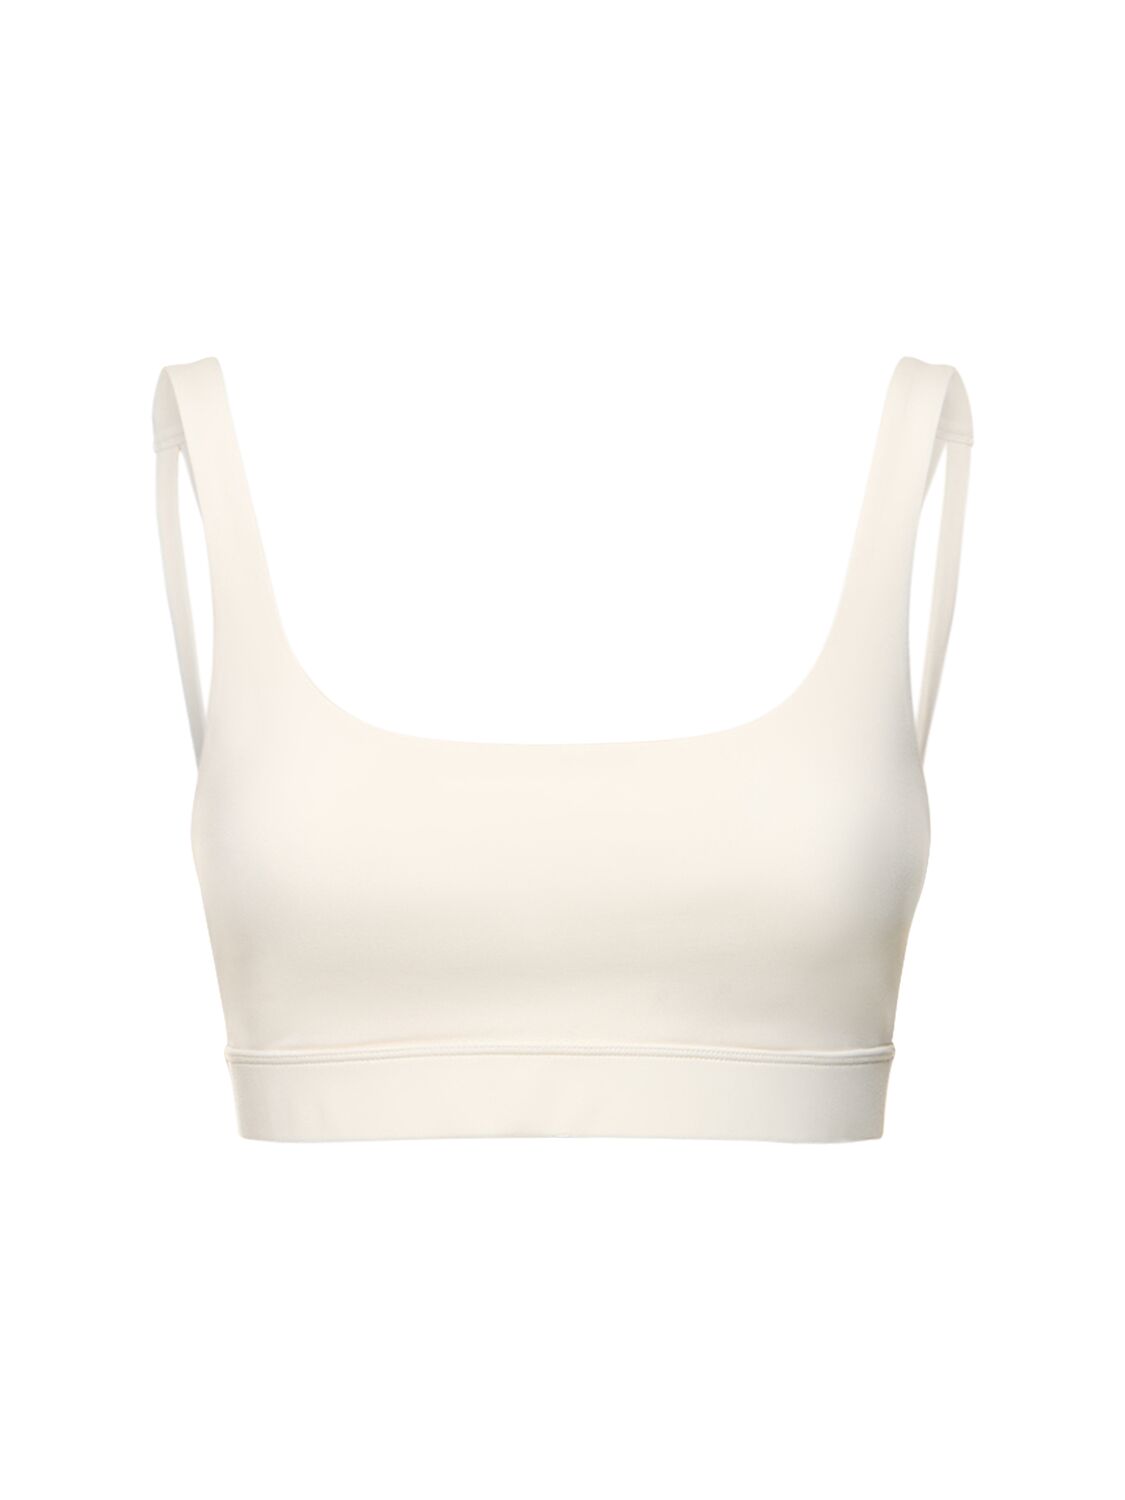 Girlfriend Collective Ssense Exclusive Pink Paloma Sports Bra In